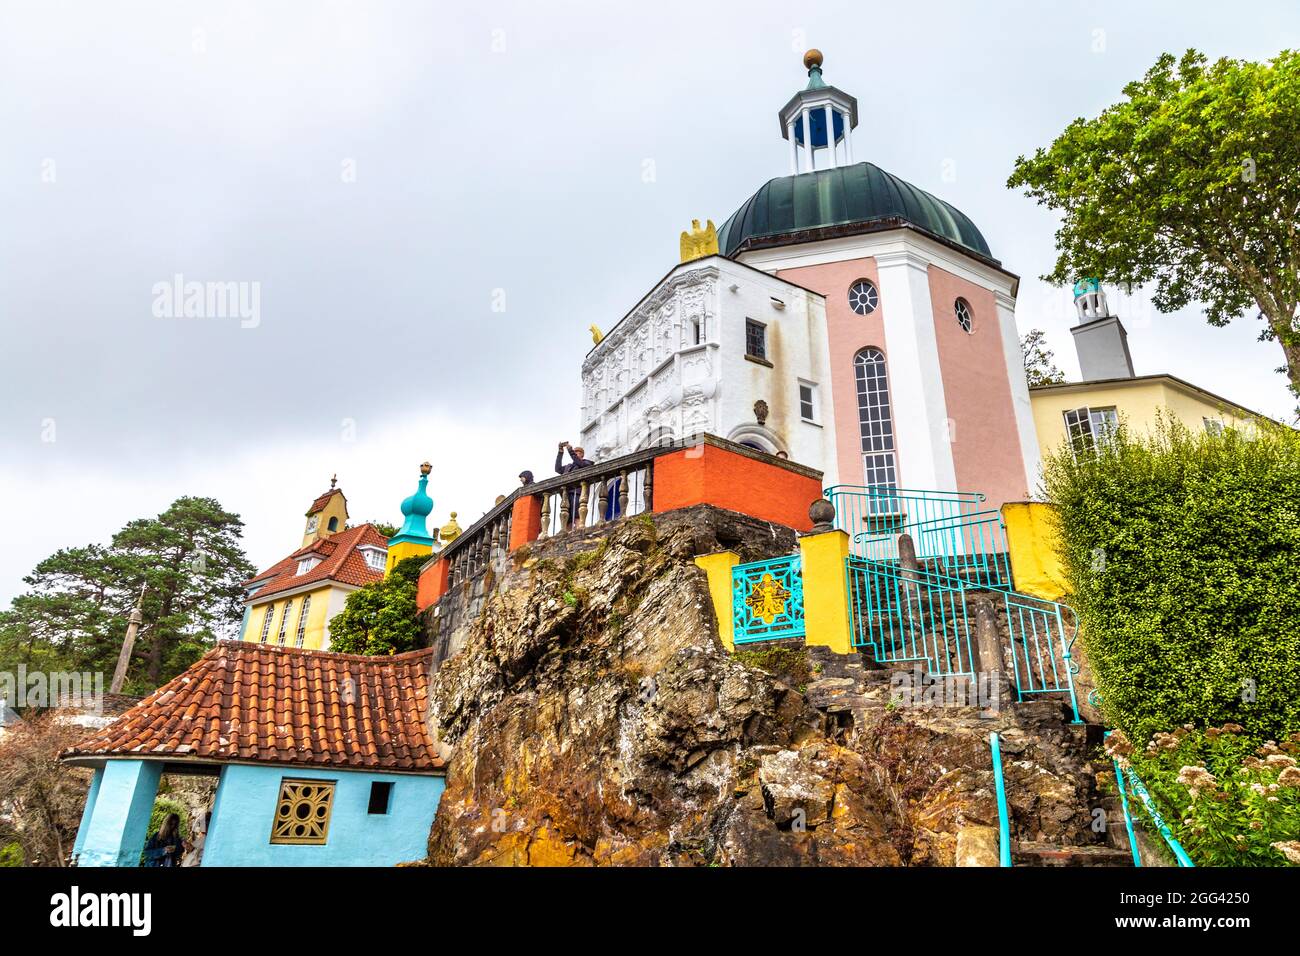 Colourful buildings at Mediterranean style town Portmeirion, Snowdonia National Park, Wales, UK Stock Photo